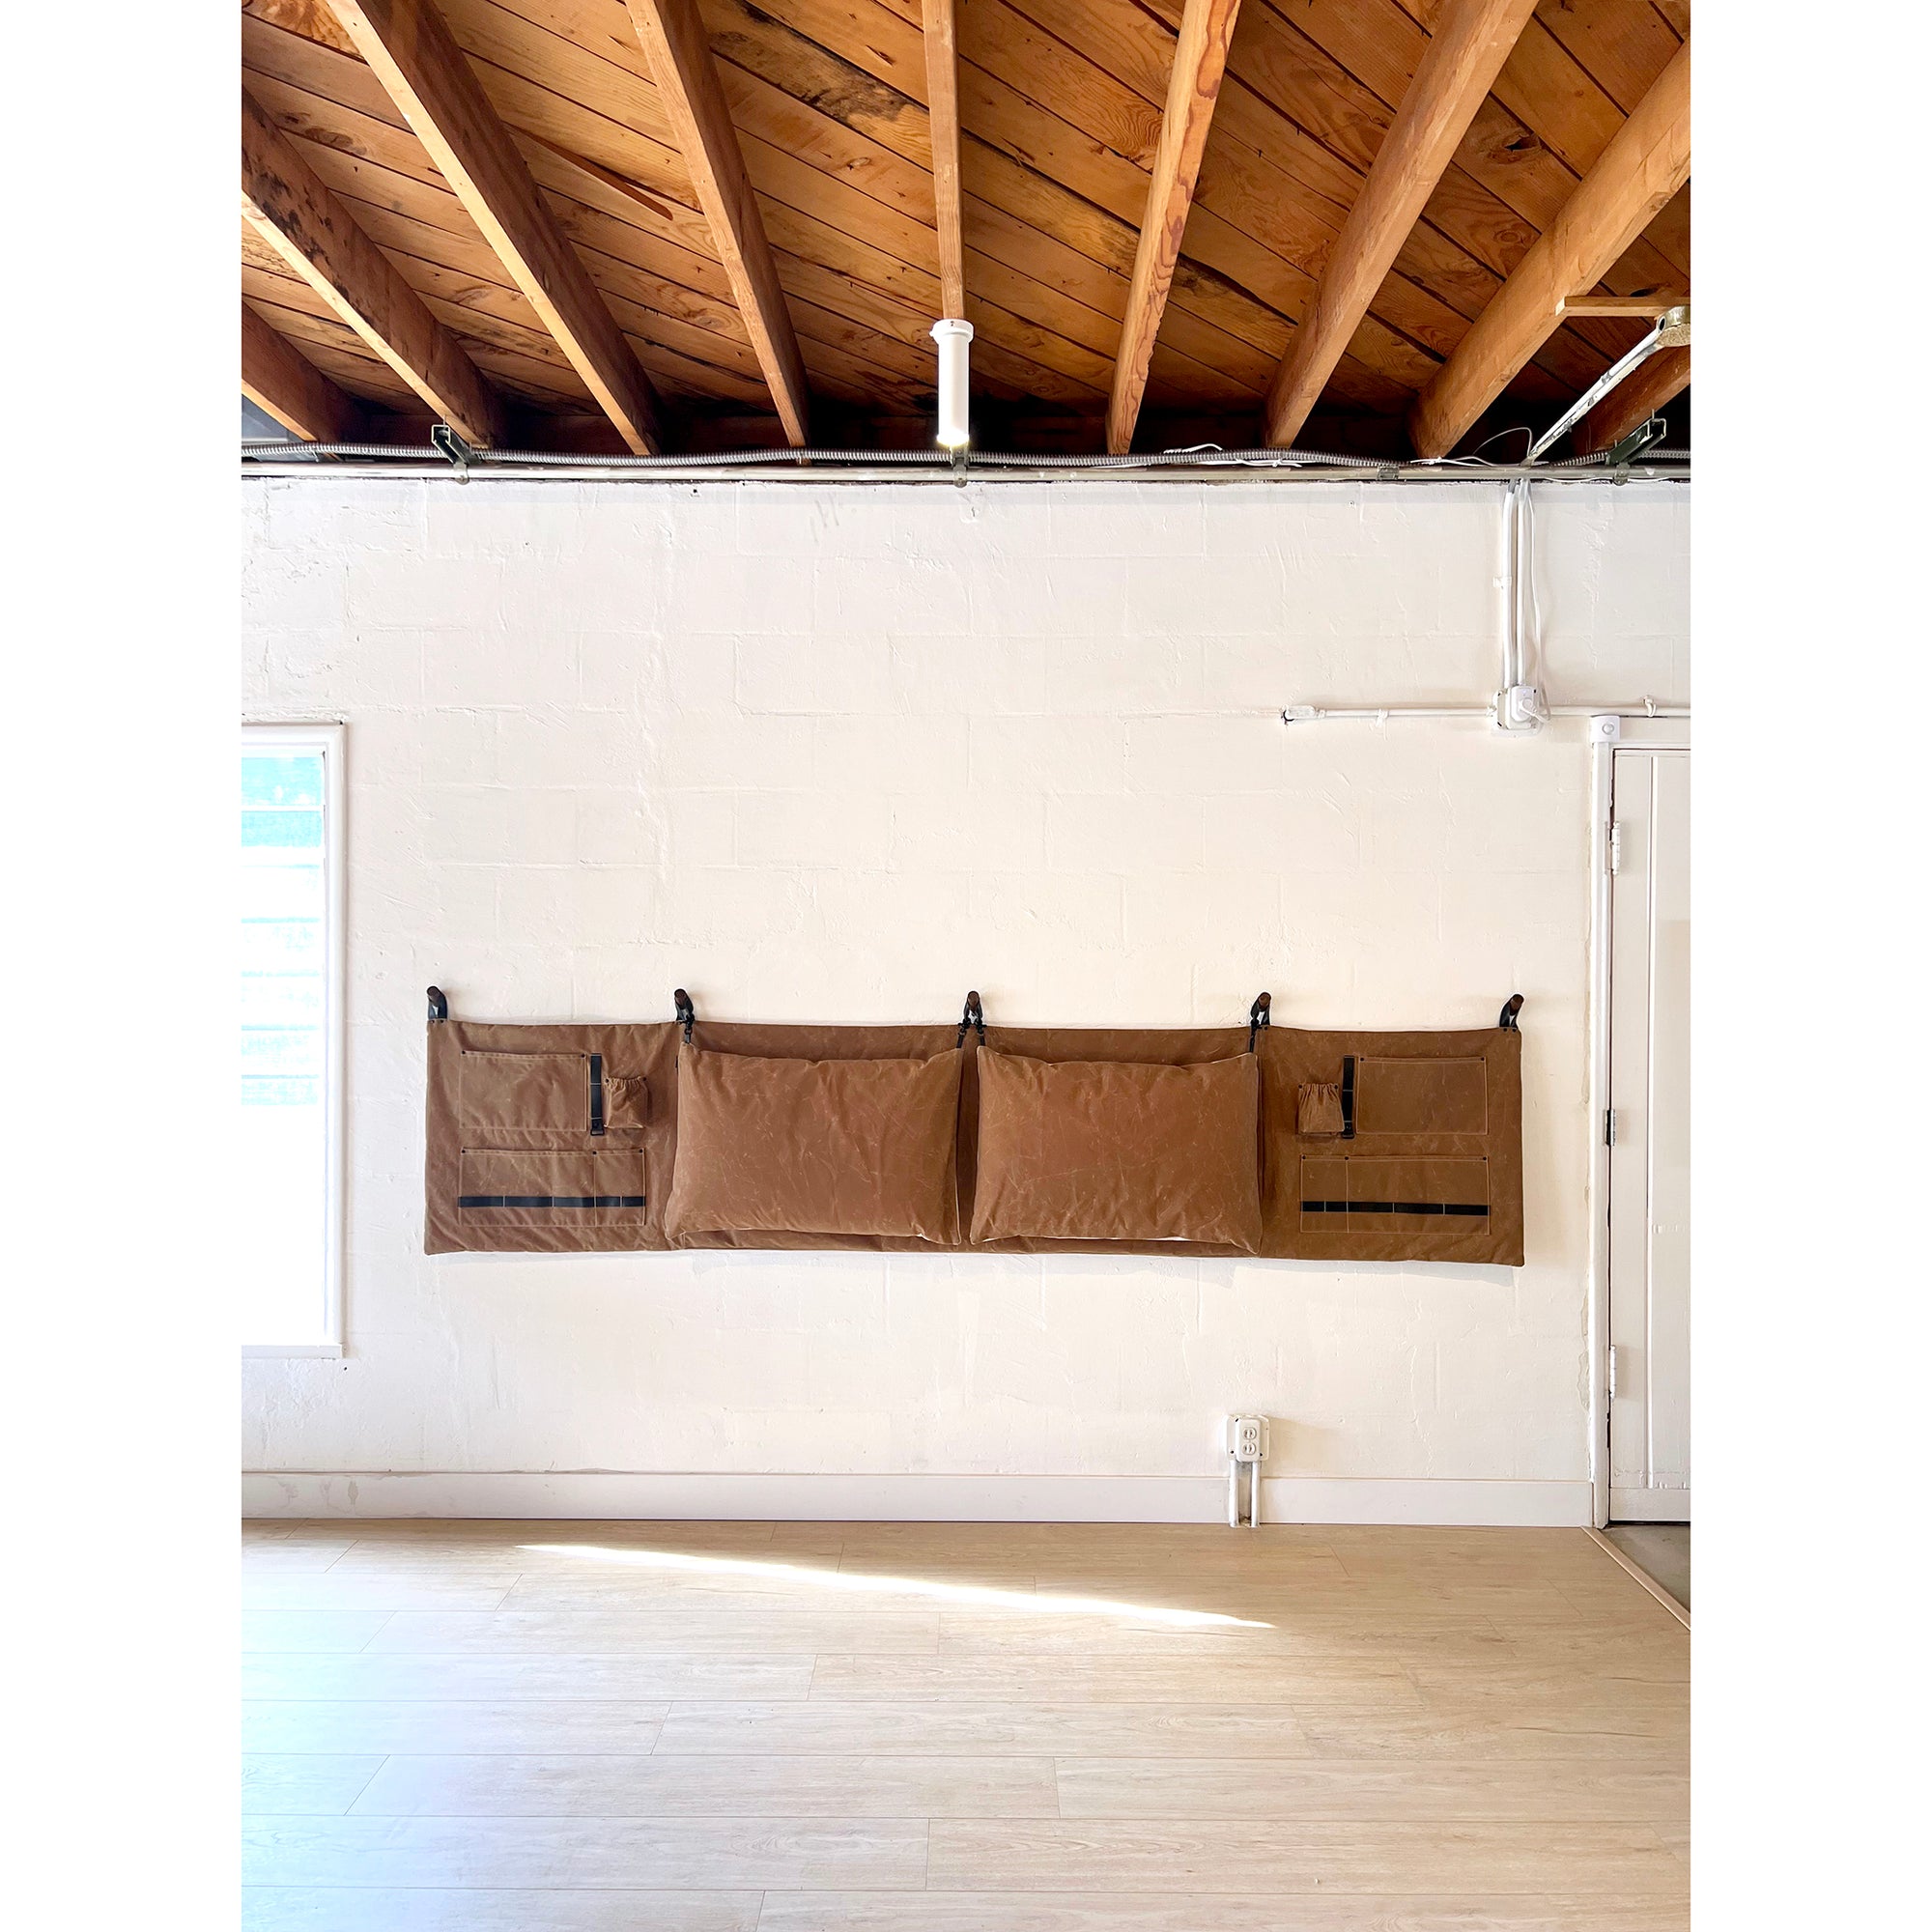 The Scout Headboard in Camel Brown Waxed Cotton Canvas hanging on a white wall in an open studio area. 